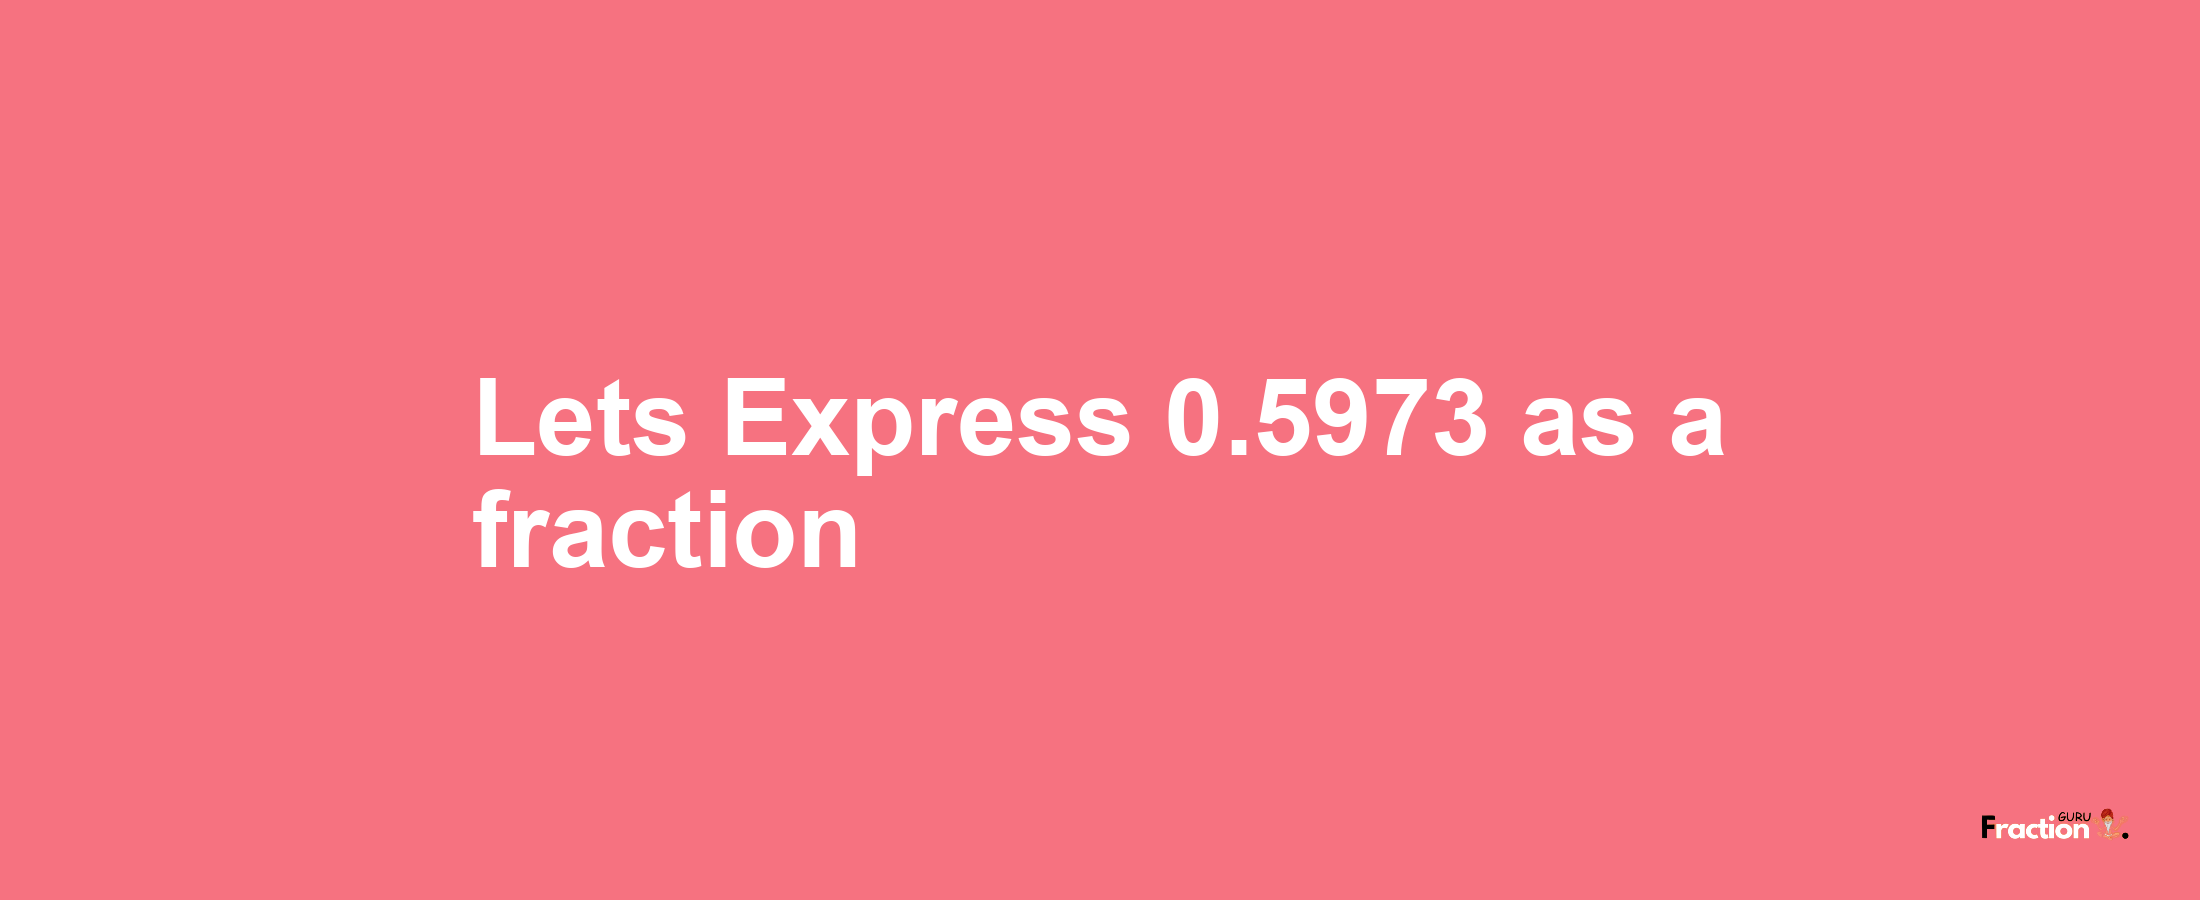 Lets Express 0.5973 as afraction